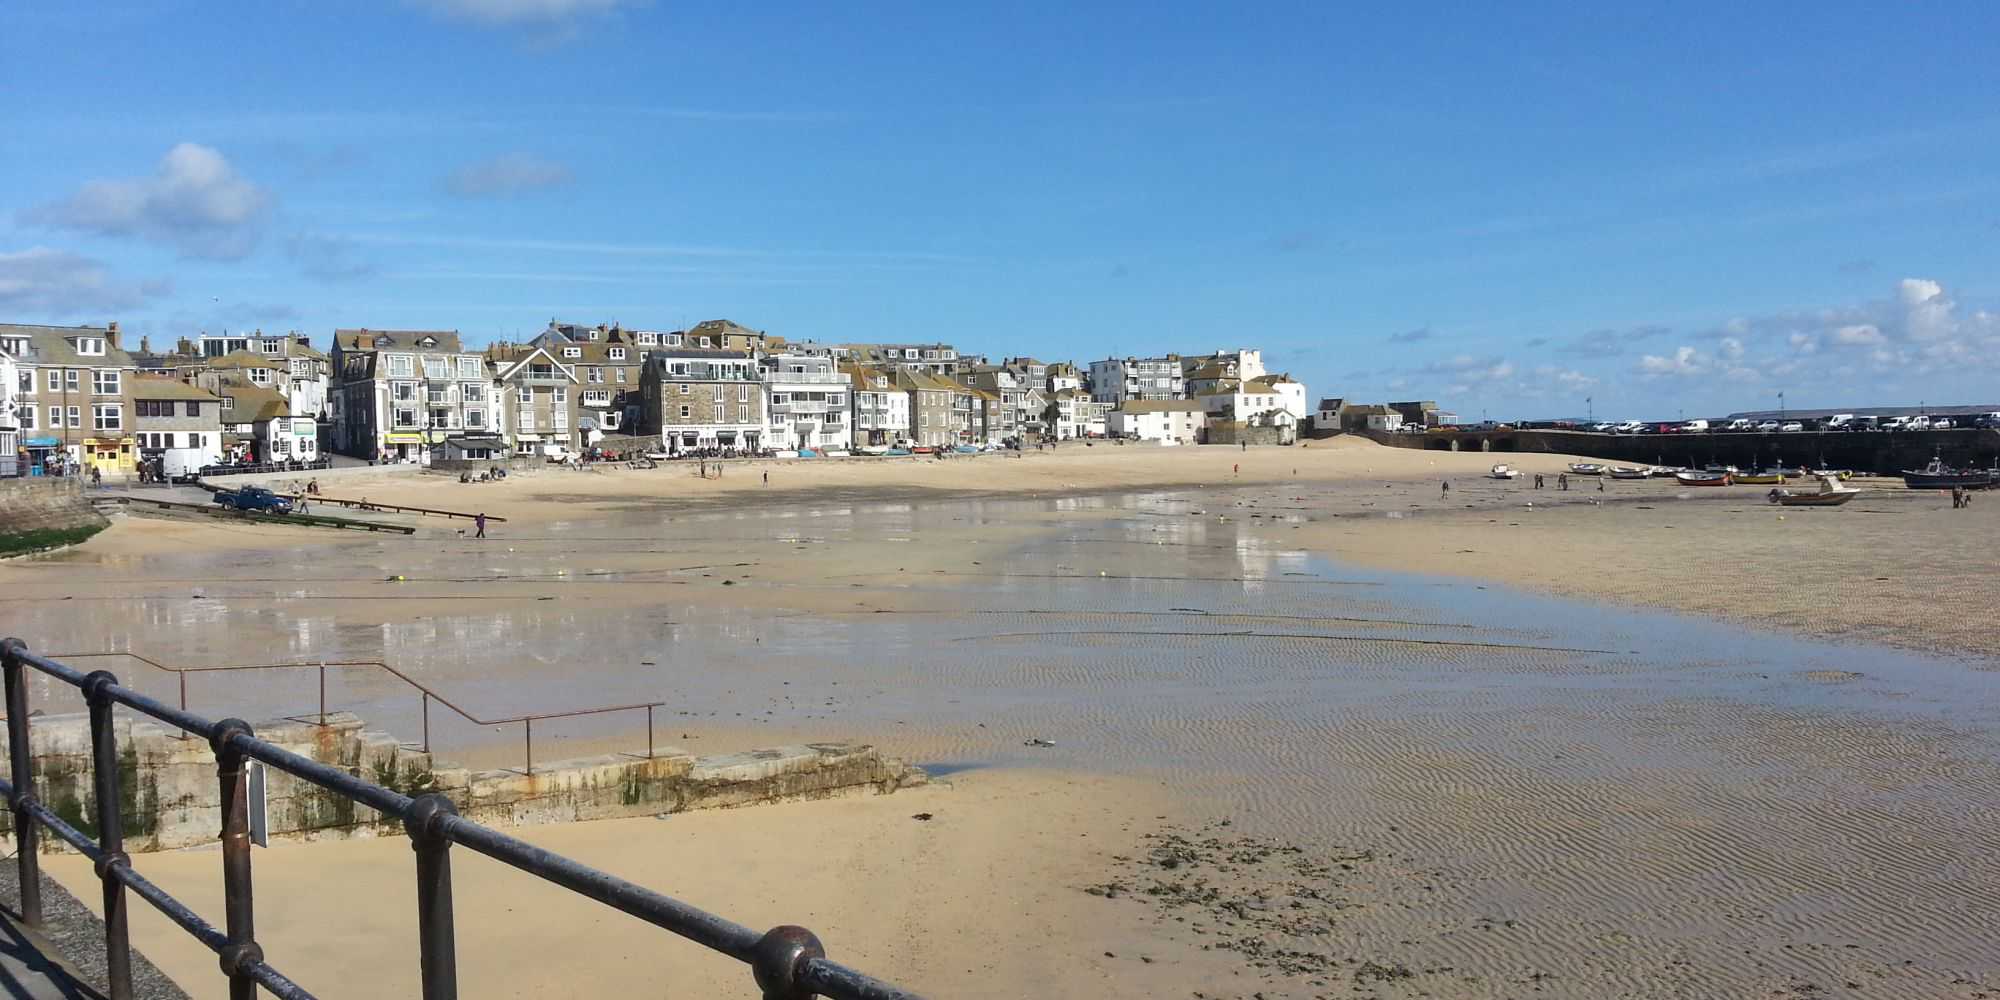 St. Ives Beach View Image